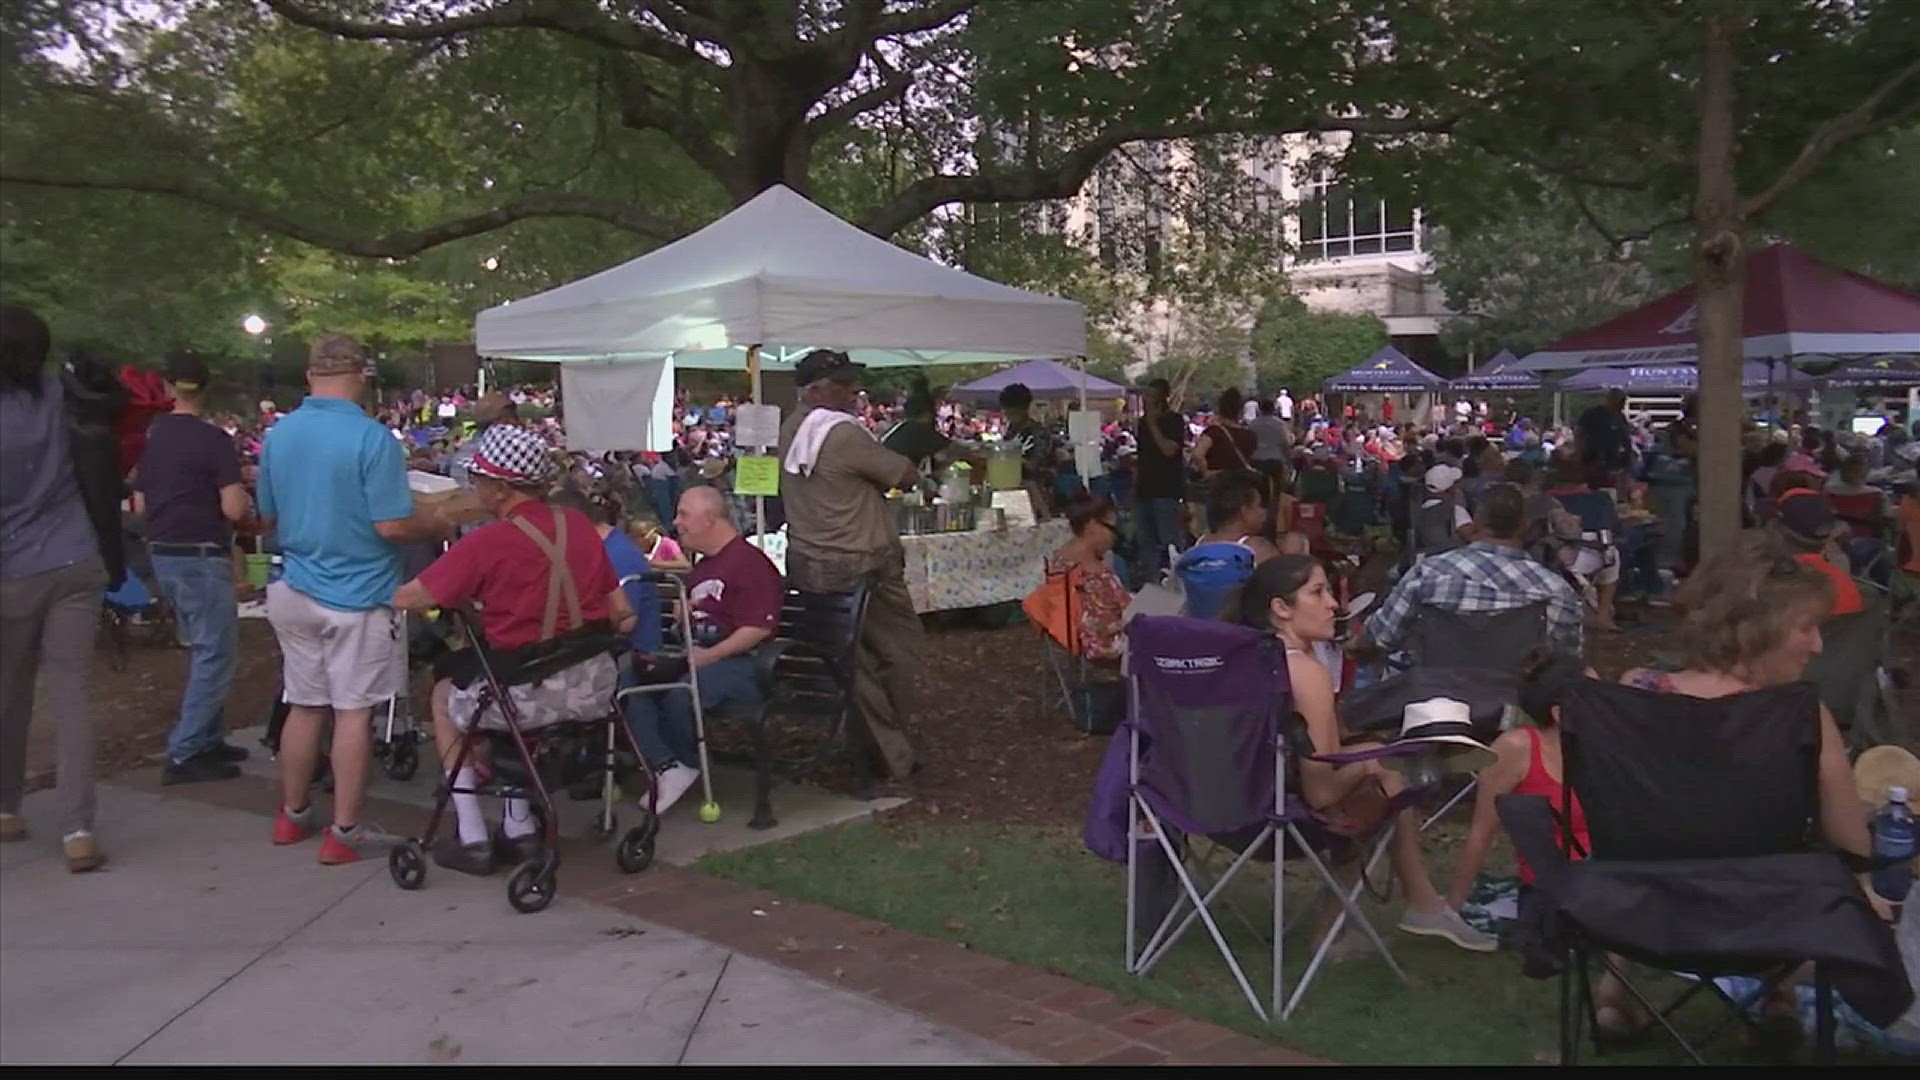 The festival is free and is held every Sunday in September from 5 to 9 p.m. in Big Spring Park East.